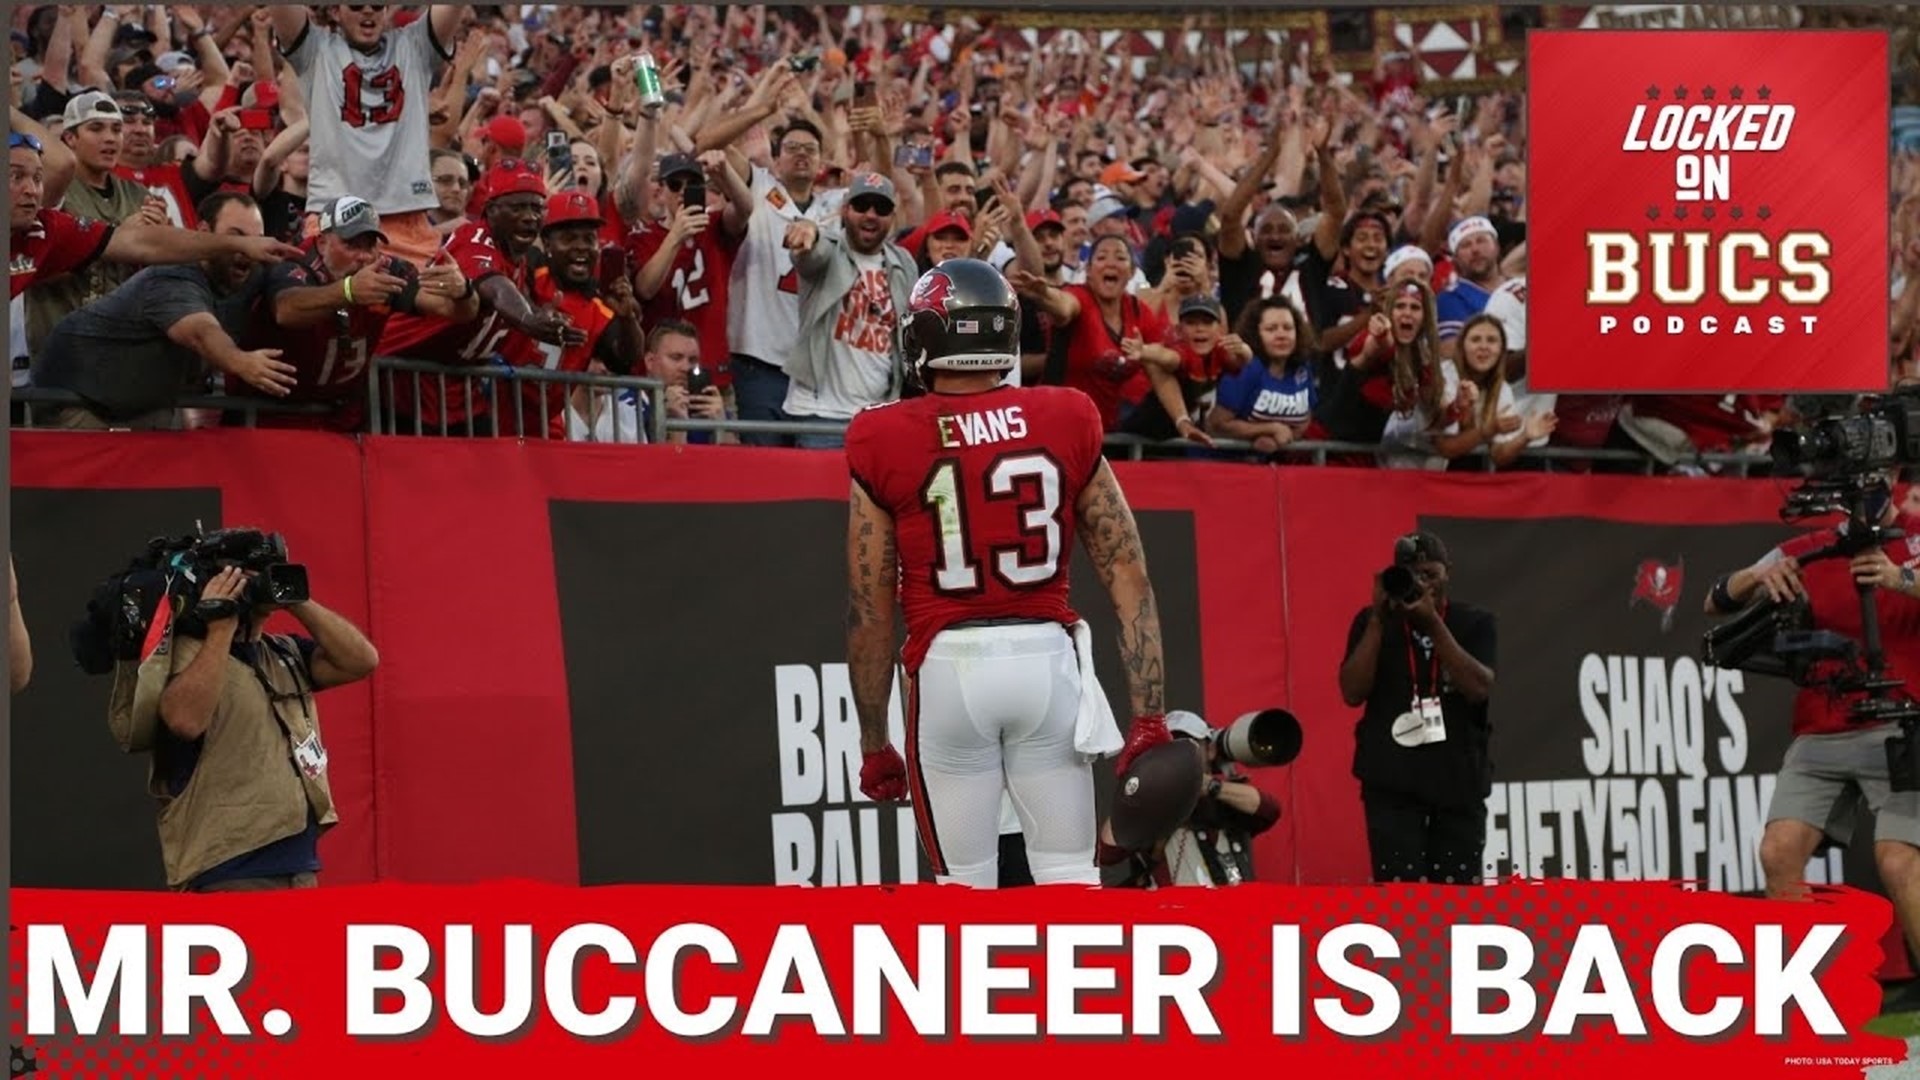 Tampa Bay Buccaneers and Mike Evans agreed to a two year deal worth up to $52-million dollars on Monday according to his agent, Deryk Gilmore.